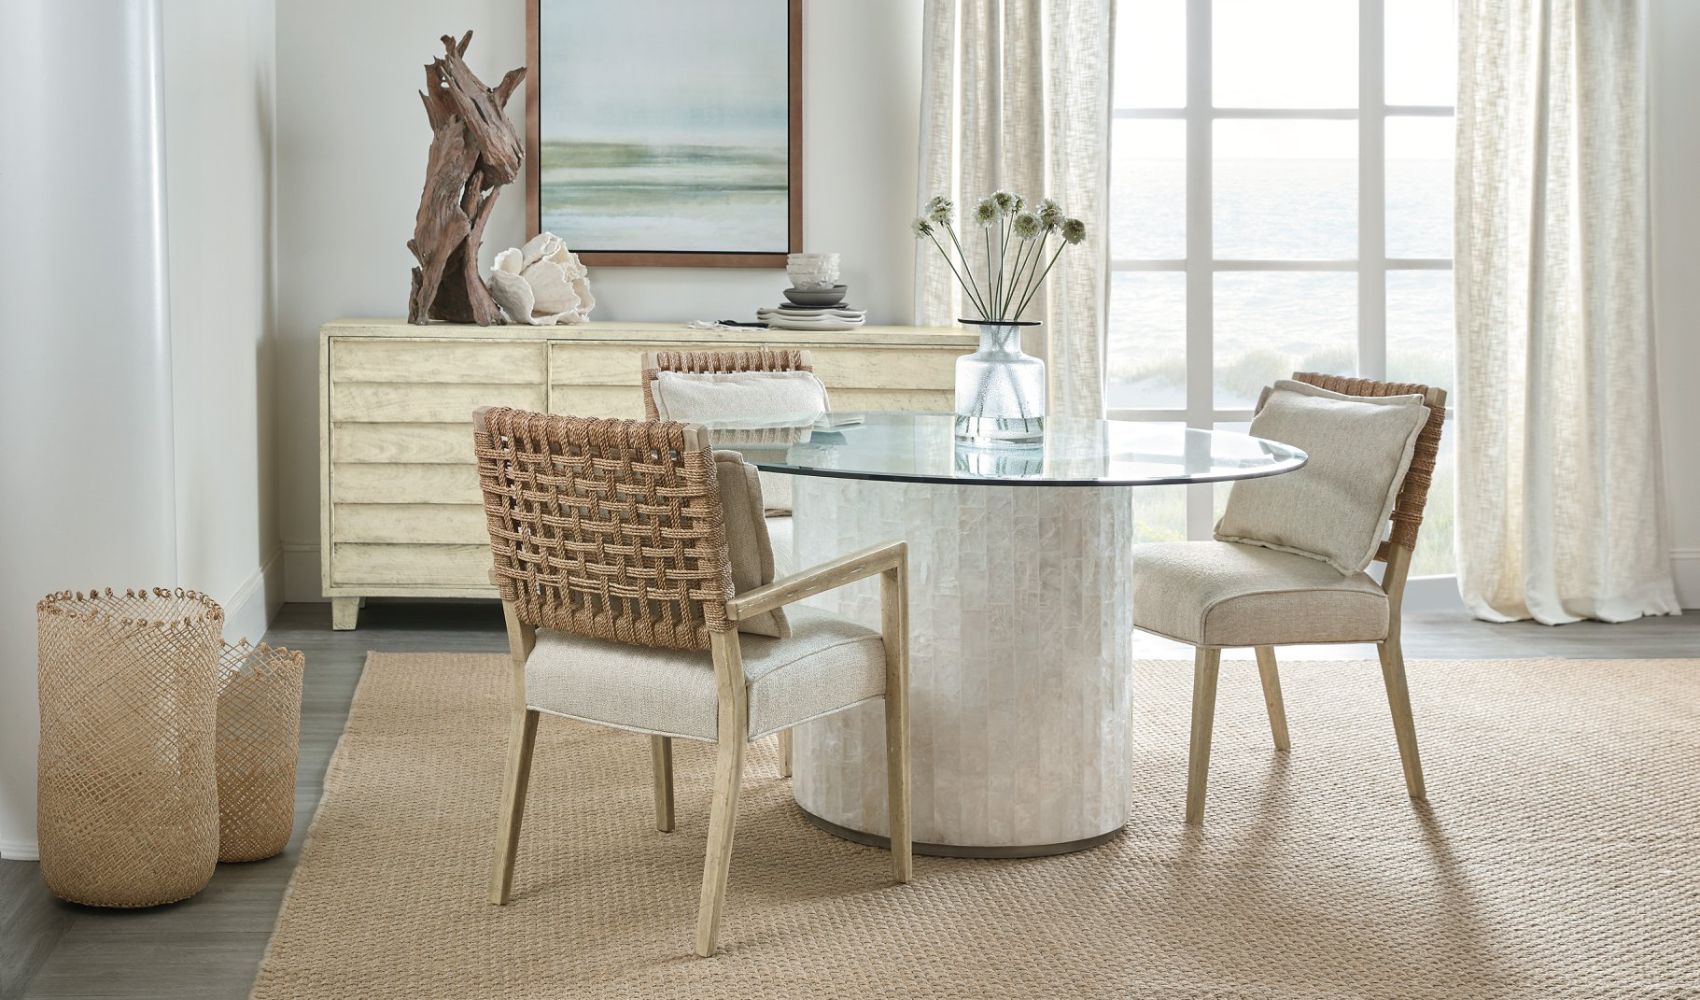 hooker pedestal table and natural wicker chairs